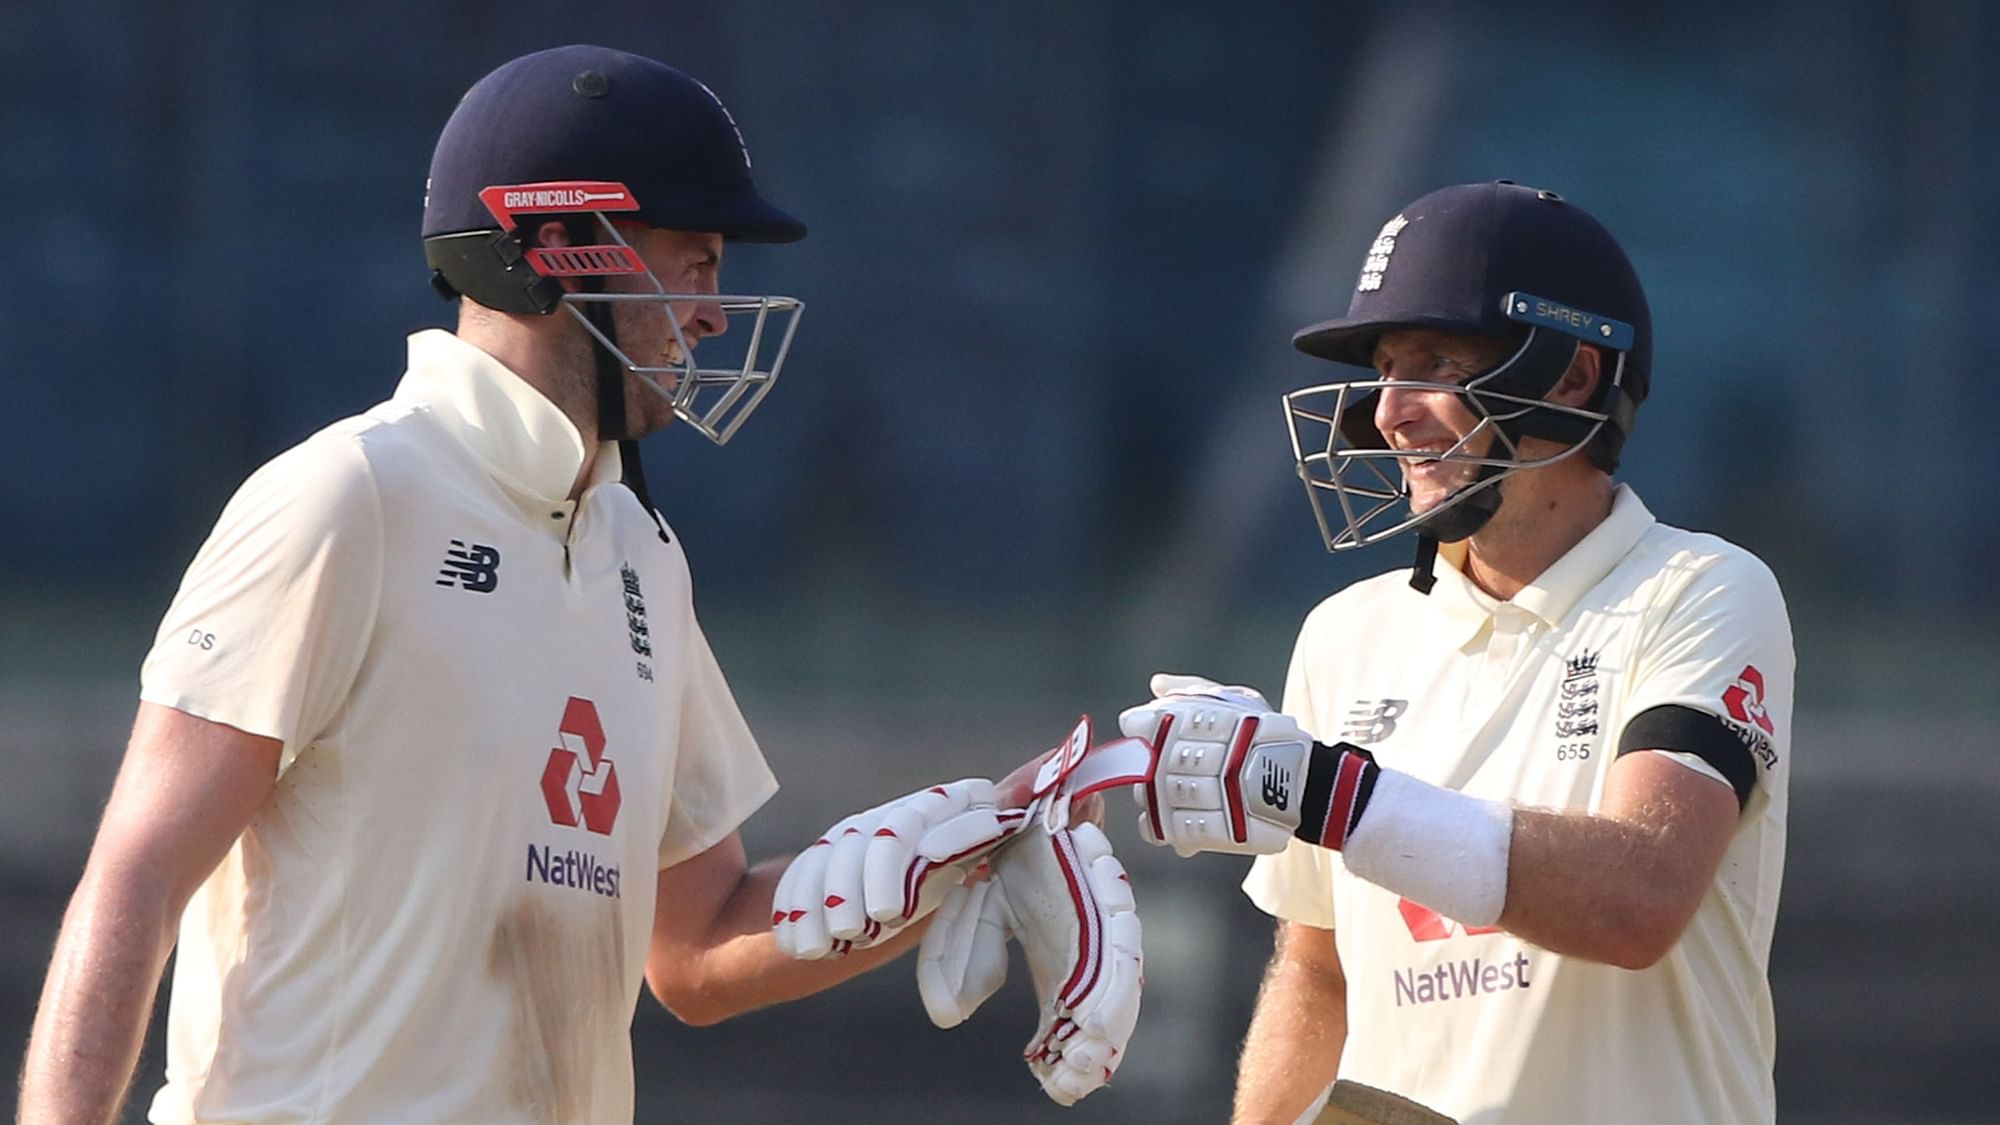 Joe Root (captain) of England and Dom Sibley of England during day one of the first test match between India and England held at the Chidambaram Stadium stadium in Chennai.